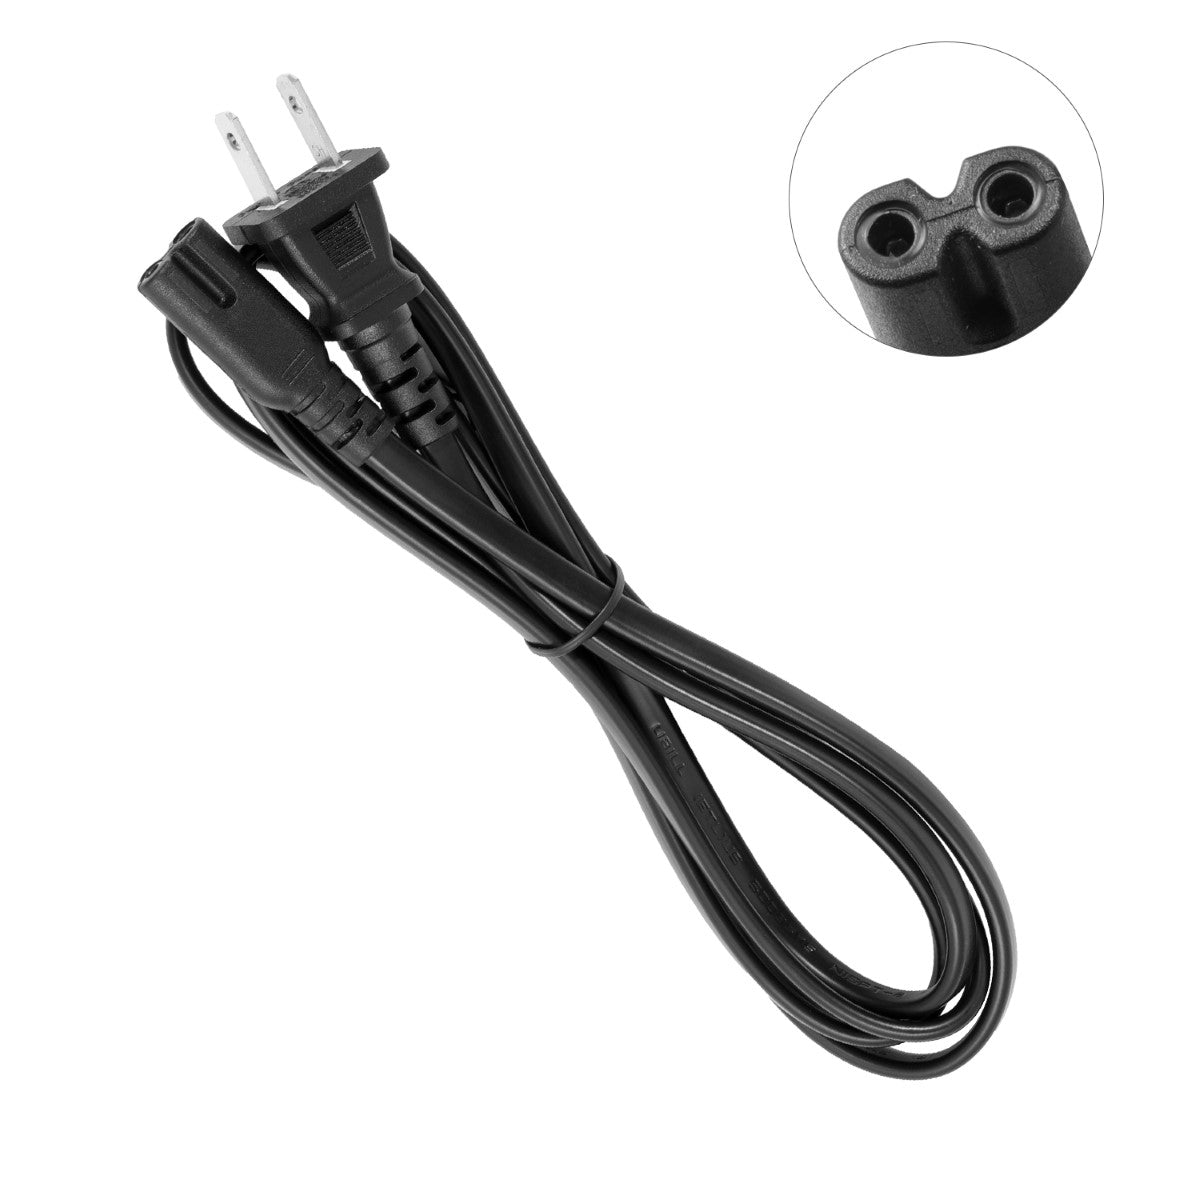 Power Cord for HP ENVY 4528 e-All-in-One Printer.